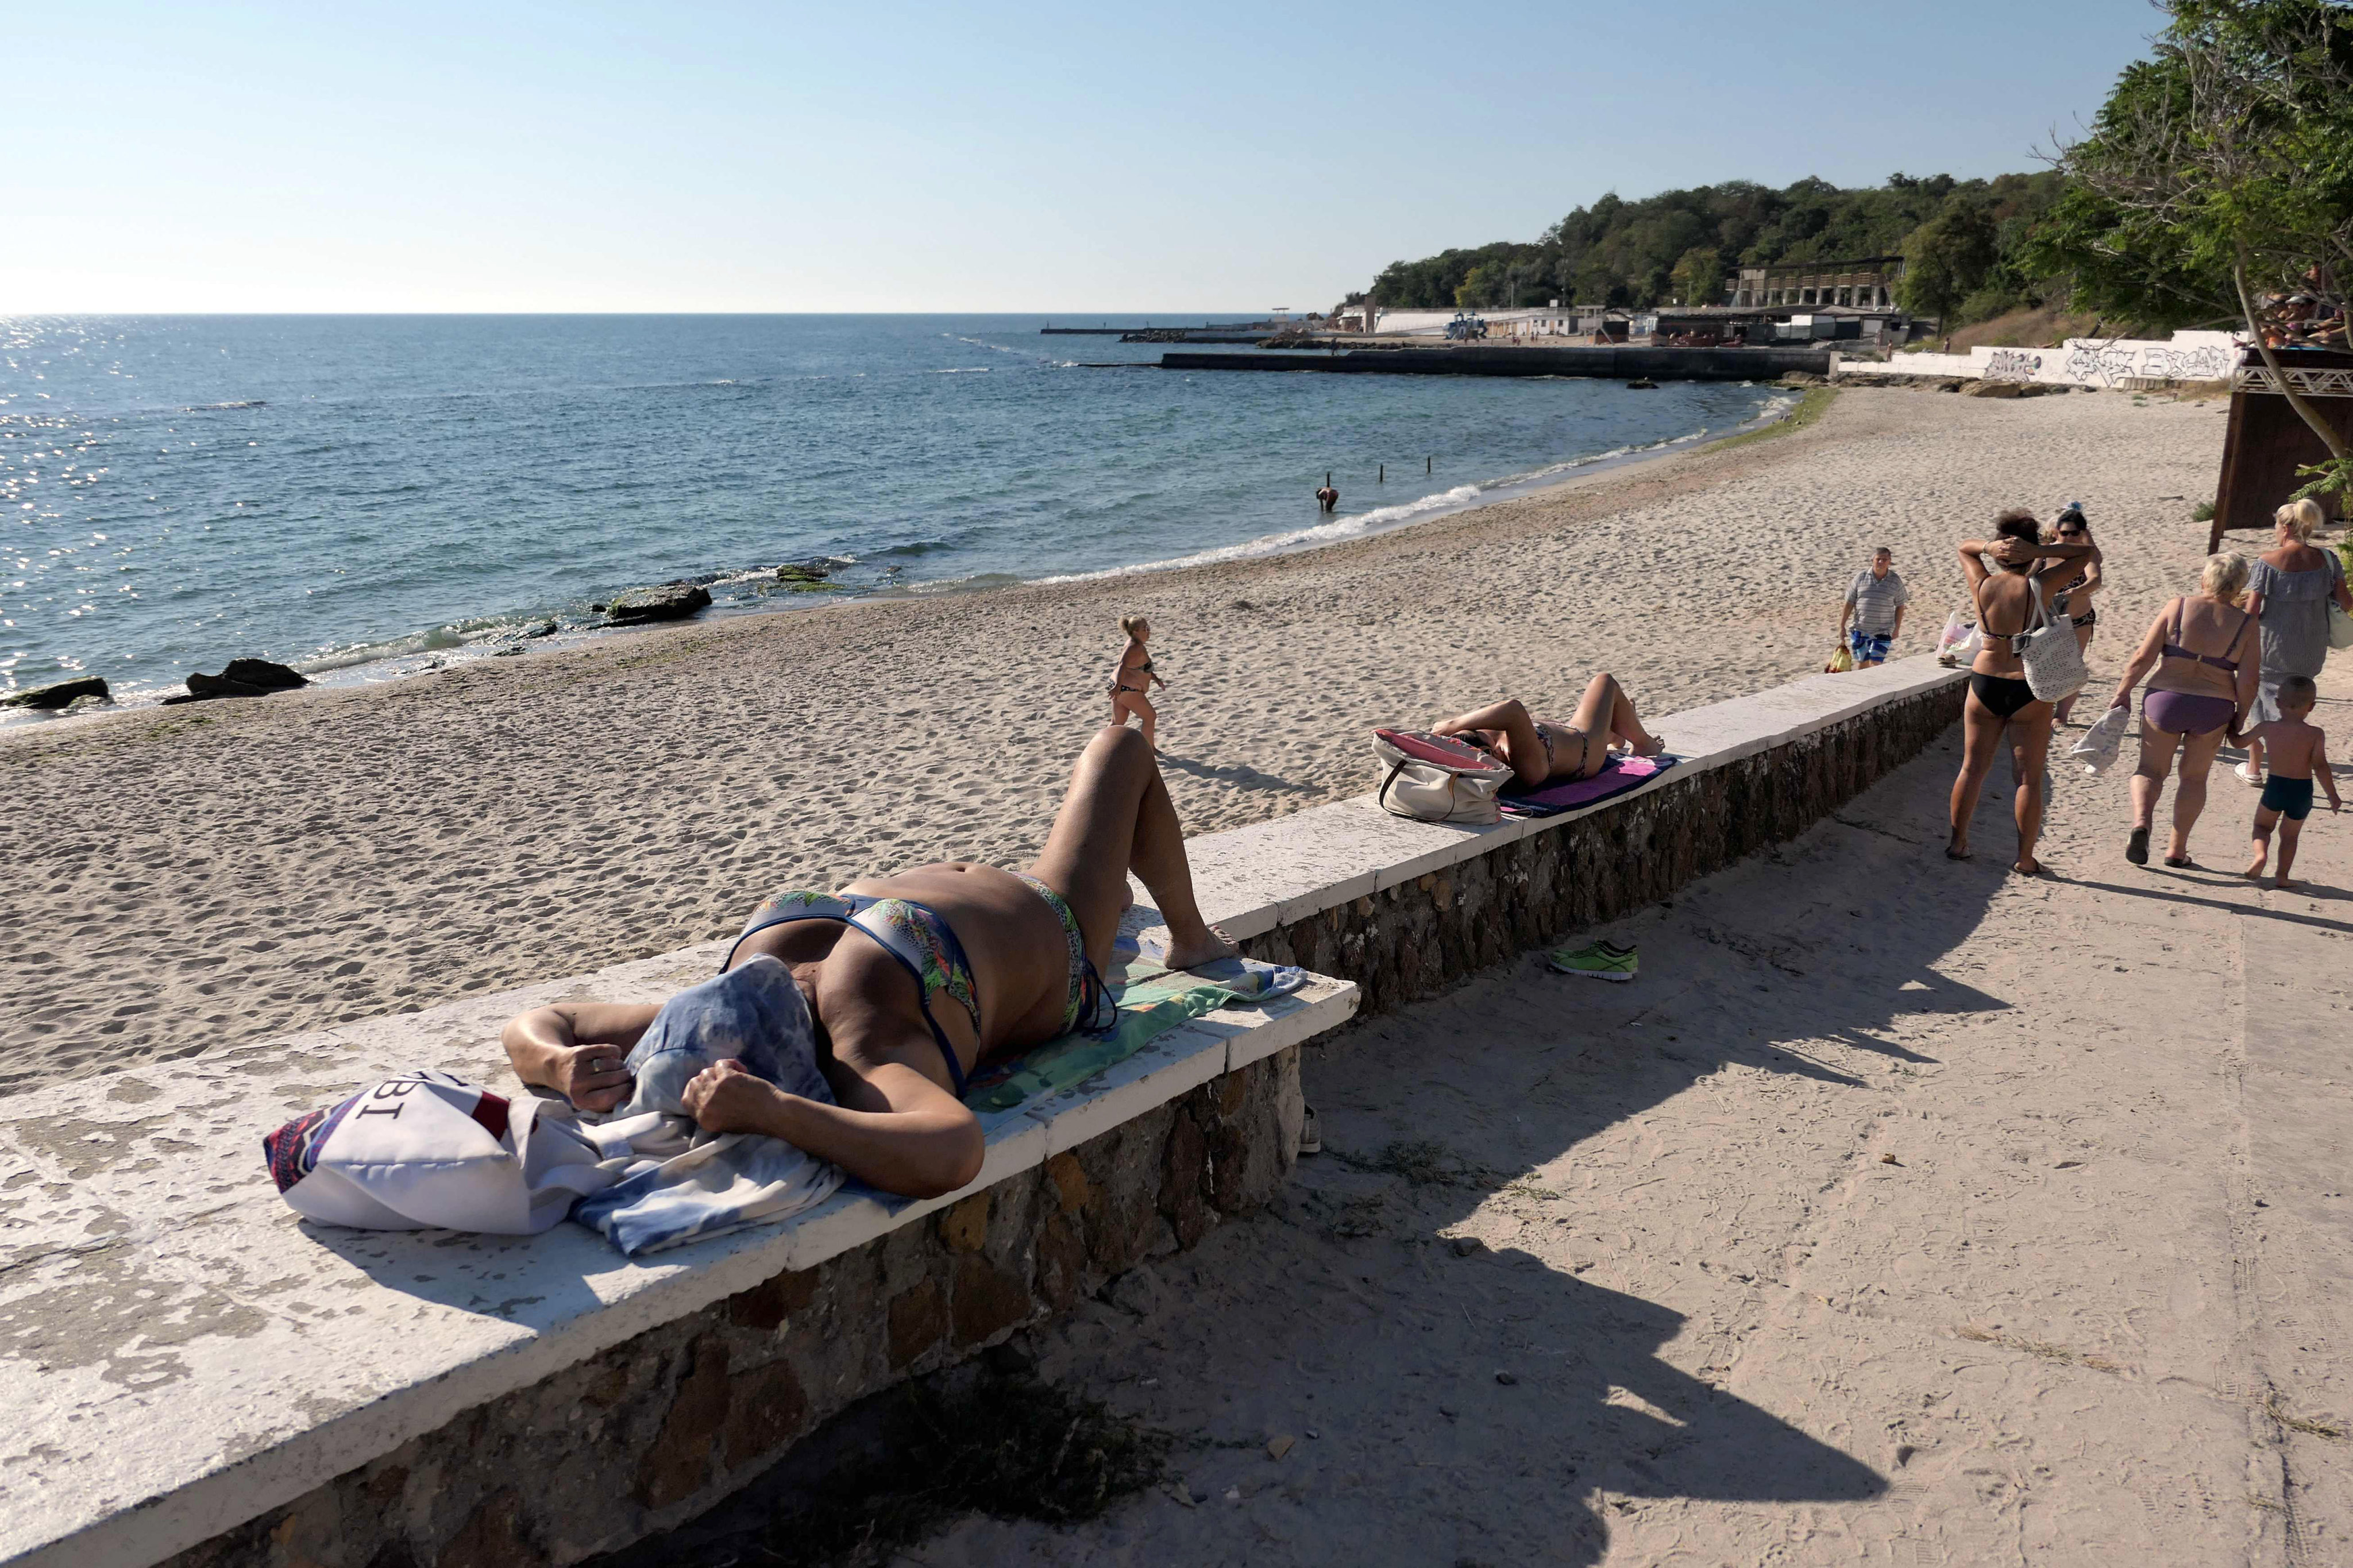 ODESA, UKRAINE - AUGUST 11, 2022 - People stay outside a beach, Odesa, southern Ukraine. This photo cannot be distributed in the Russian Federation. (Photo credit should read Yulii Zozulia/ Ukrinform/Future Publishing via Getty Images)